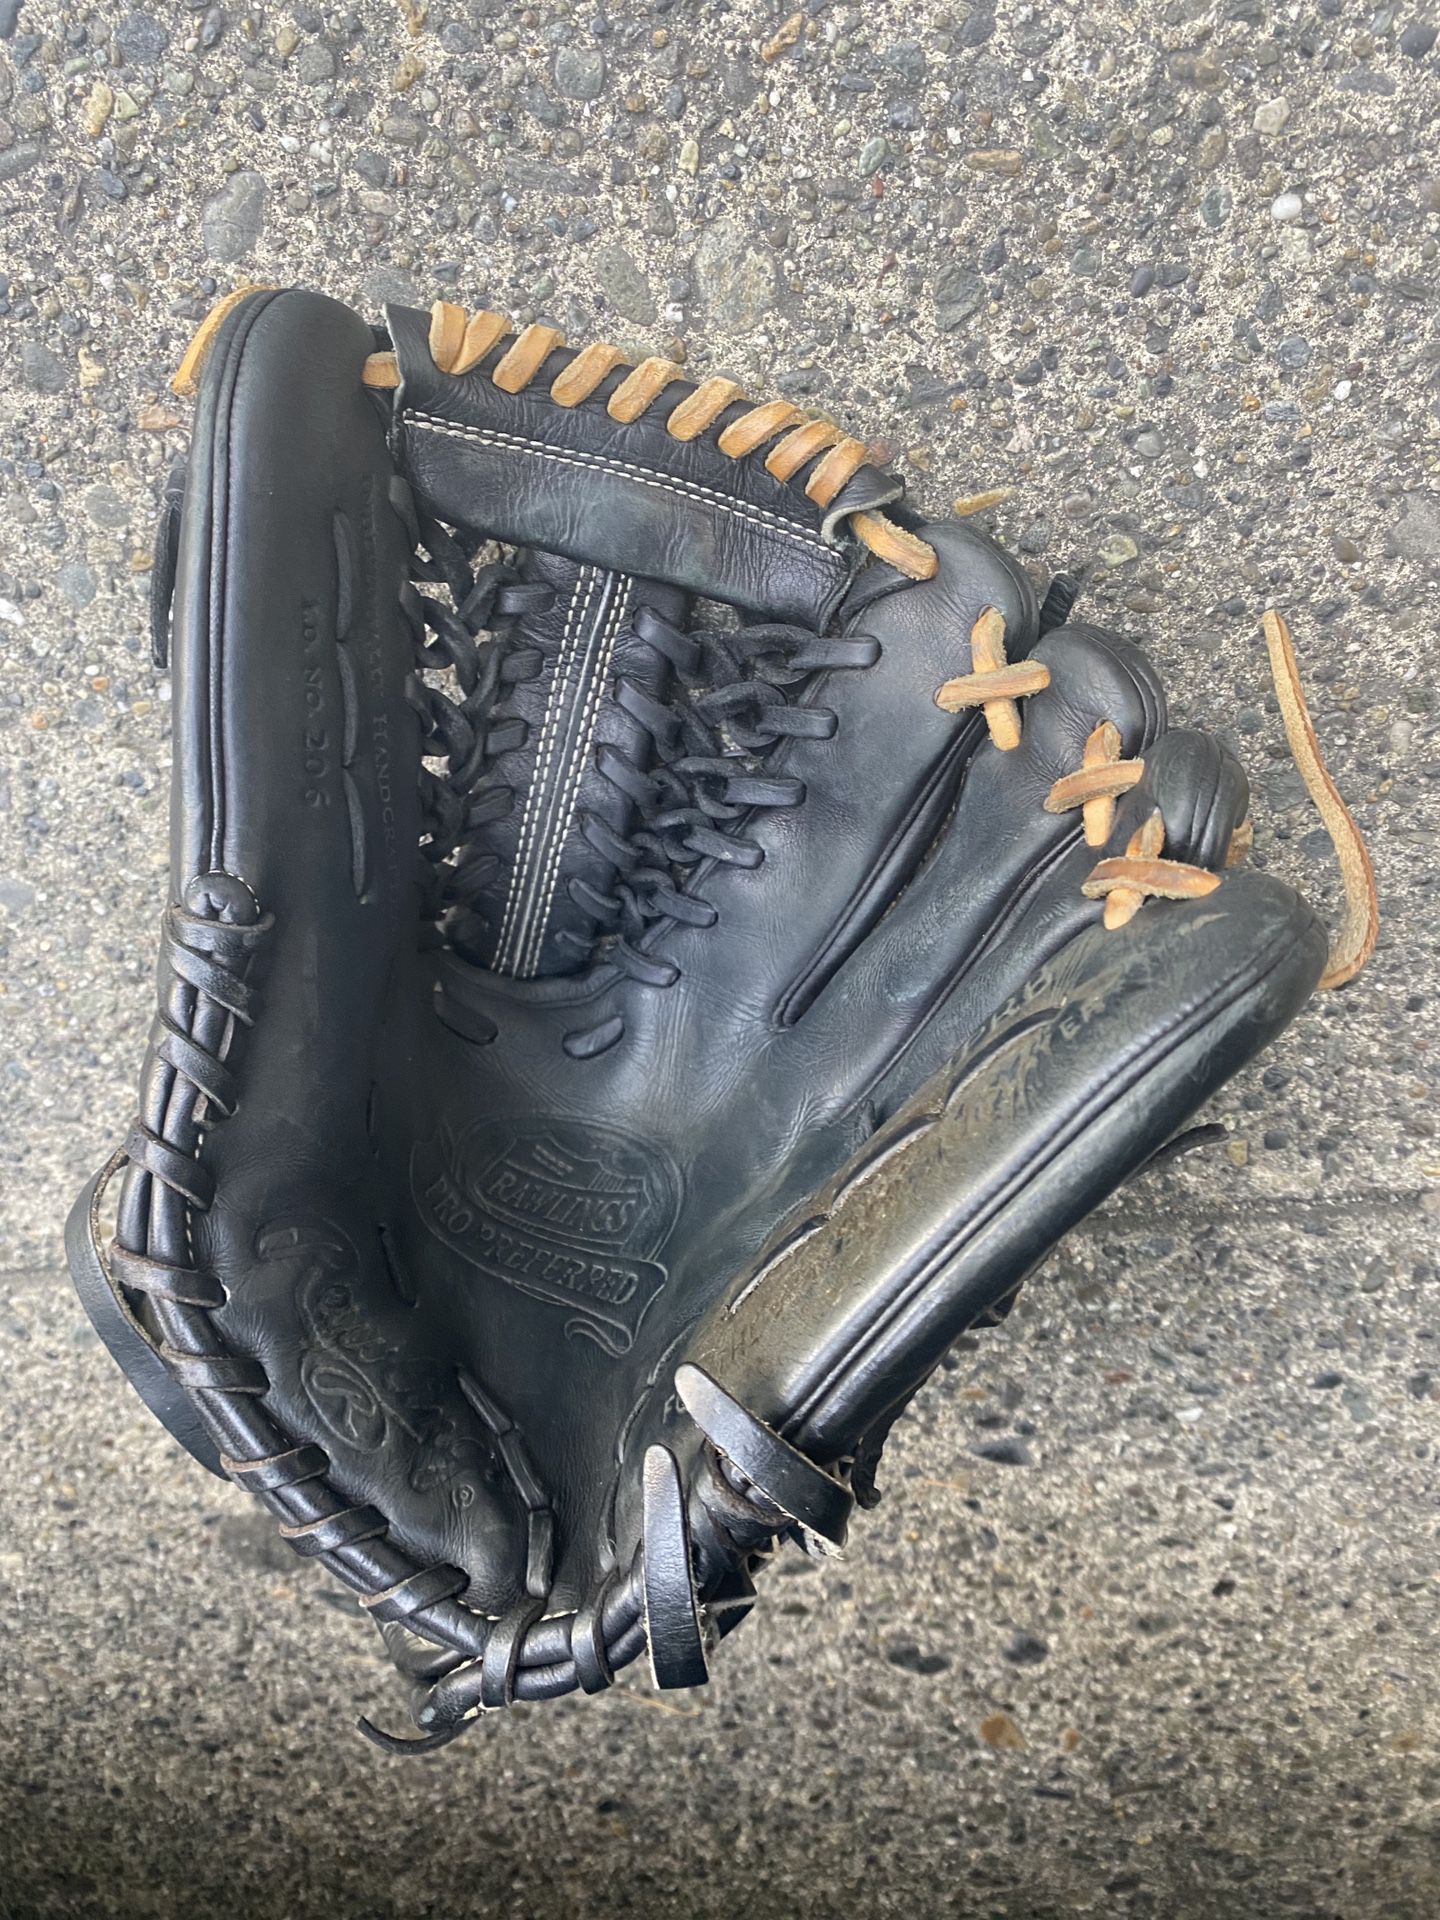 Rawlings Pro Preferred Baseball Glove - MLB Player Used (Send offer Or trade)